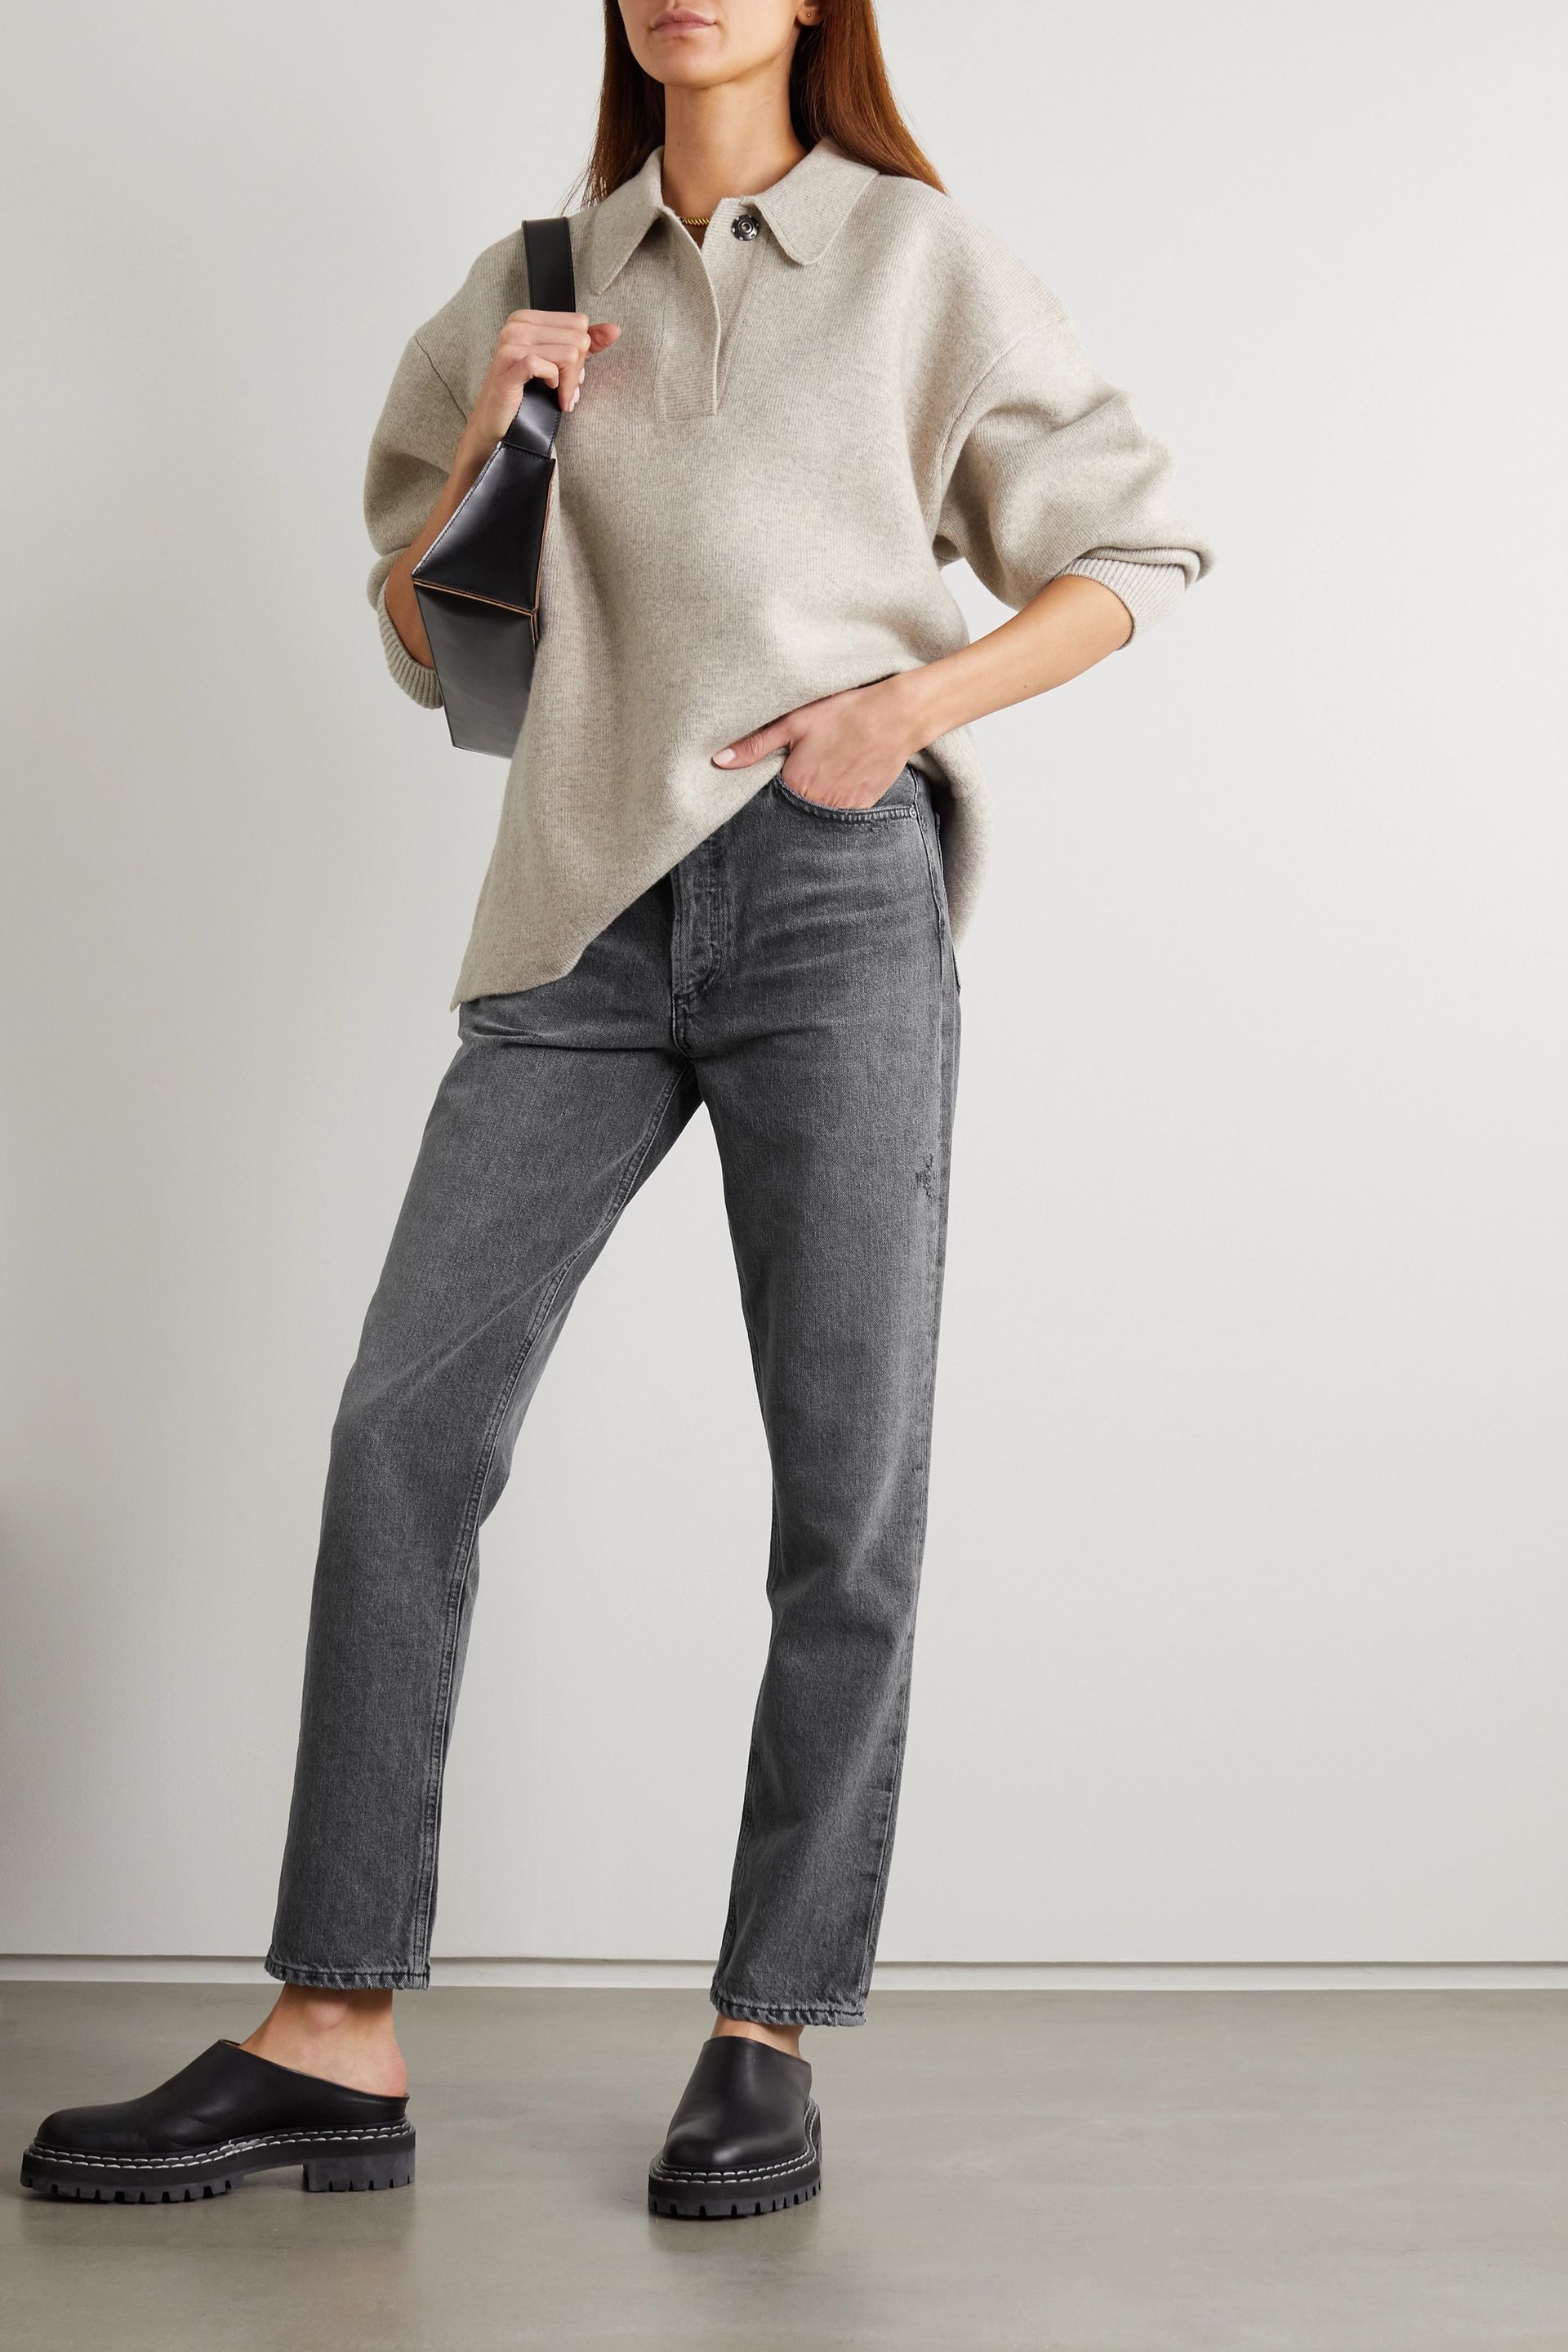 The 25 Best Gray Jeans and How to Style Them | Who What Wear